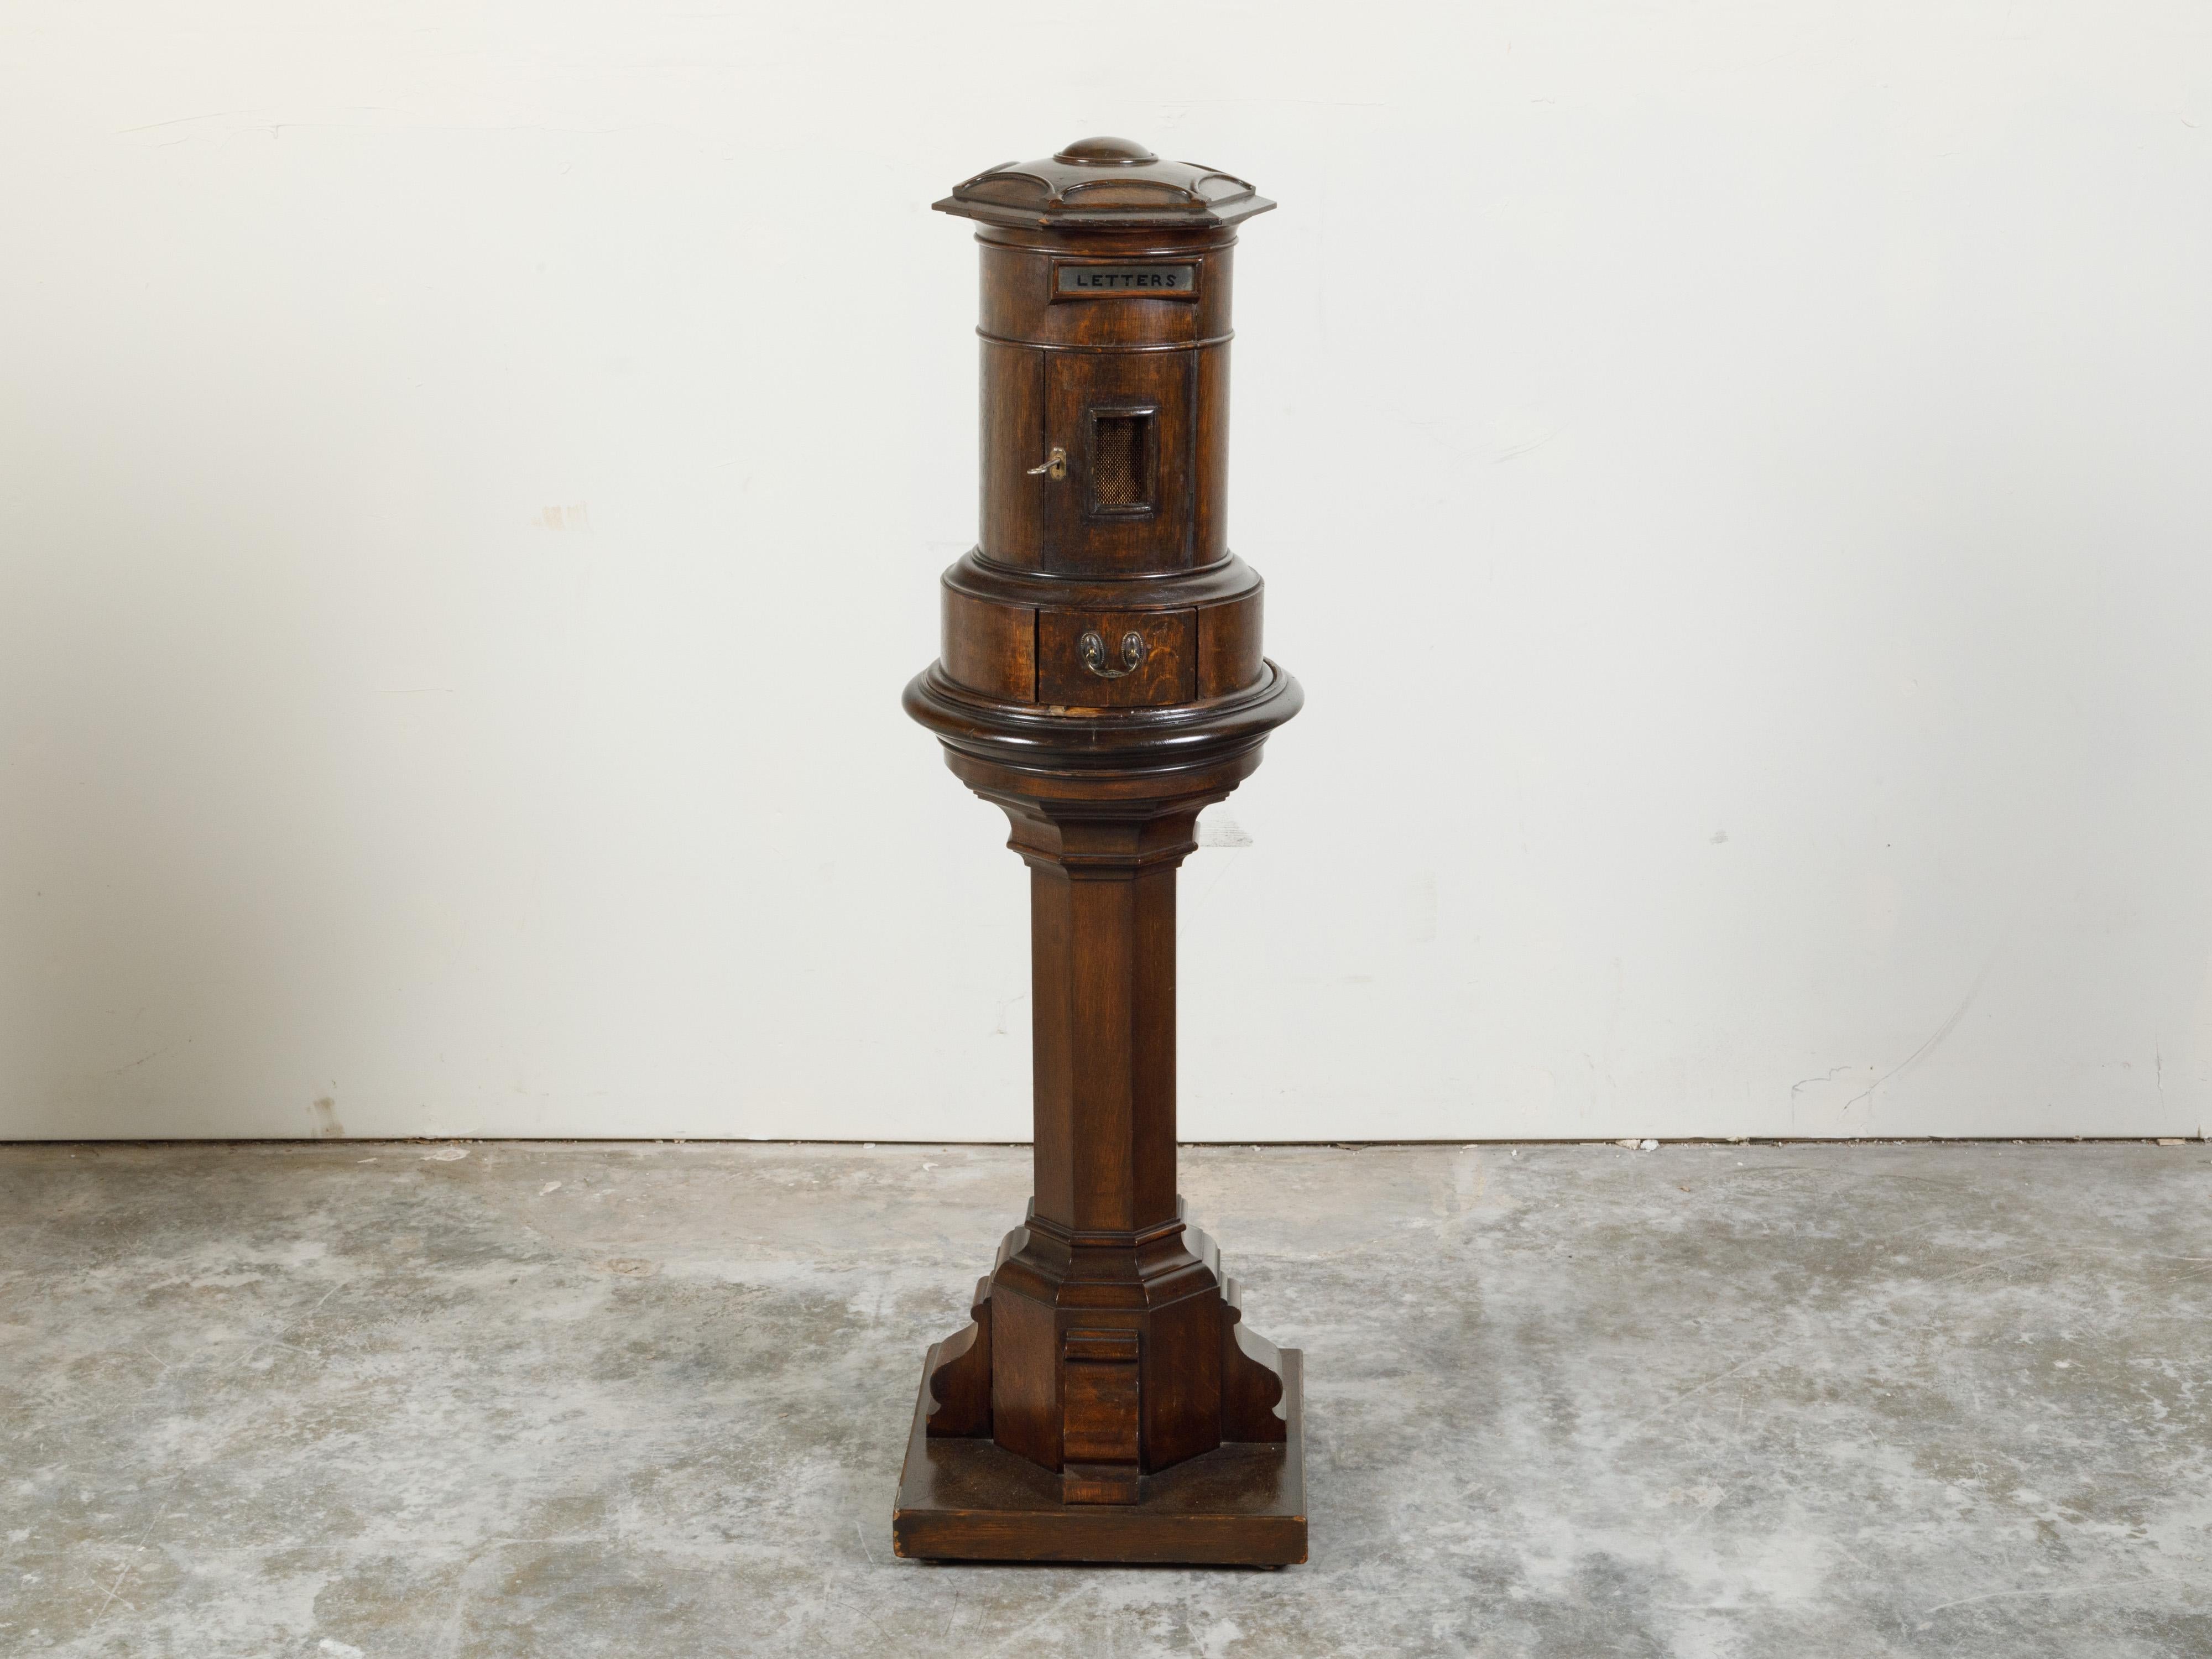 An English two-part wooden mailbox from the 19th century, with pedestal, petite door and drawer. Created in England during the 19th century, this wooden mailbox features a cylindrical top with petite door and drawer, sitting above an hexagonal